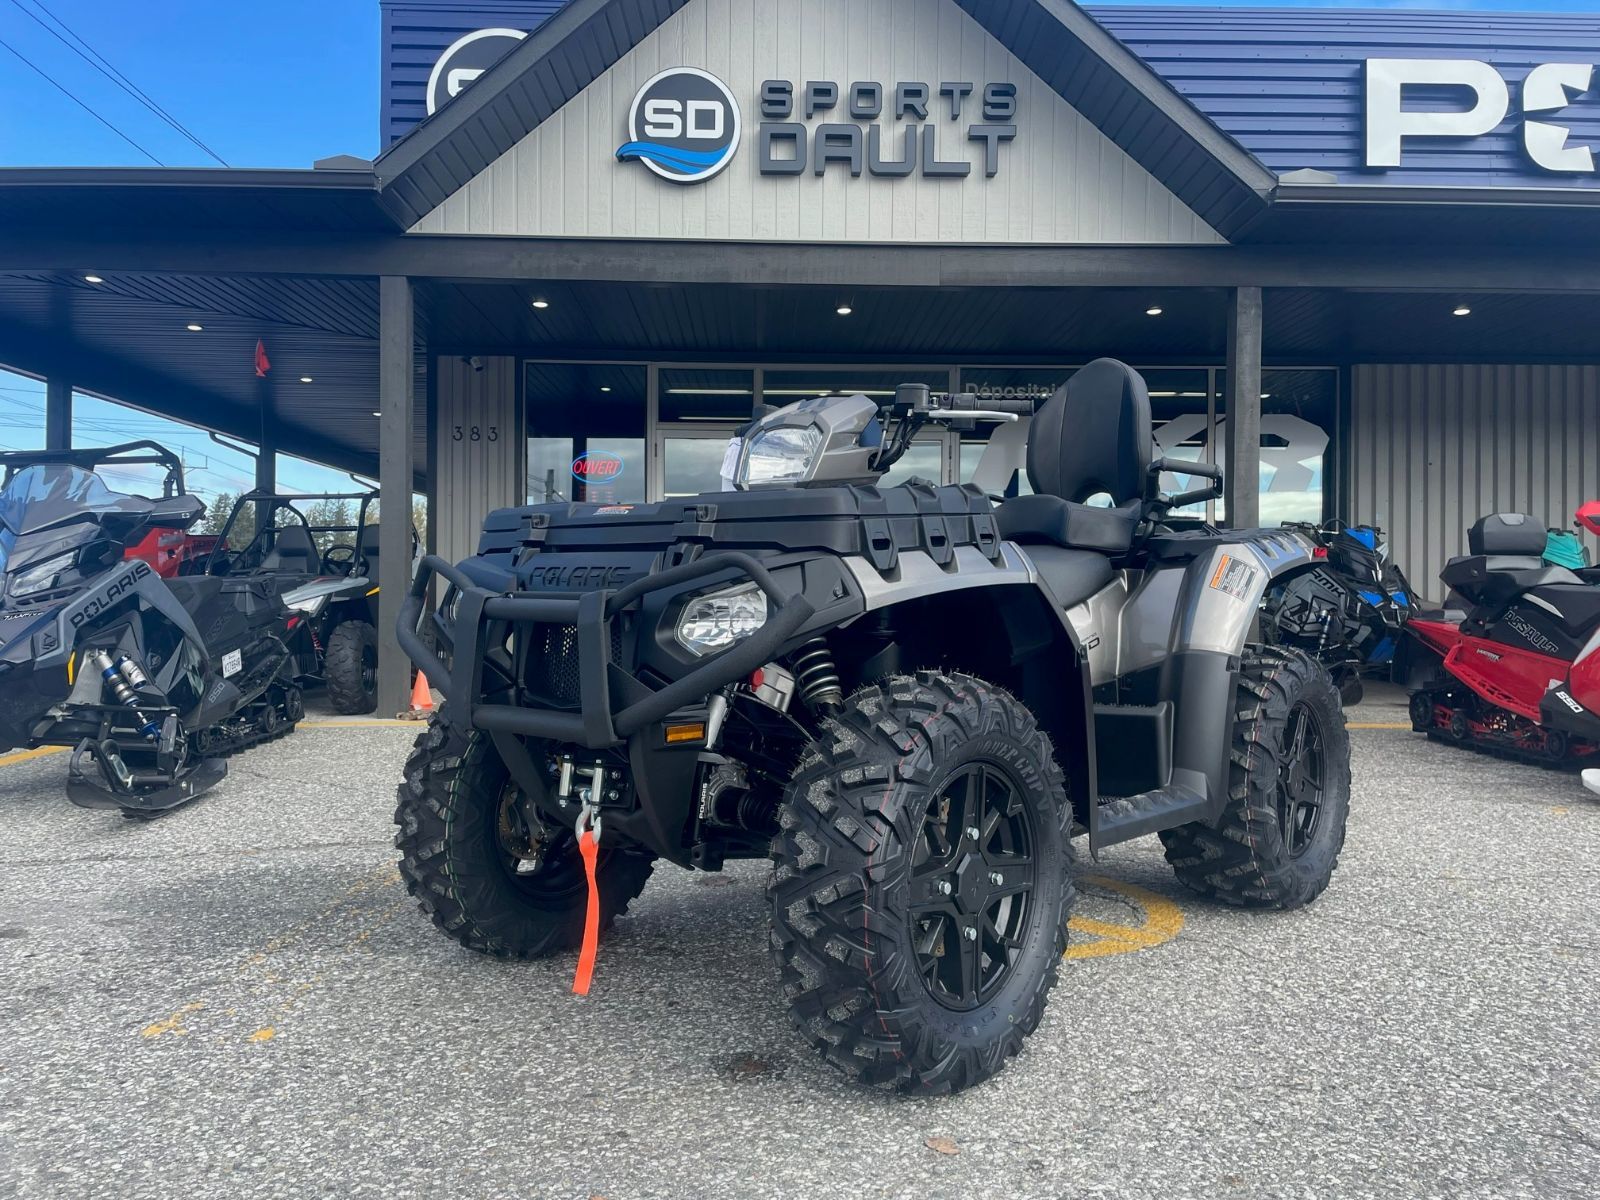 Atv Polaris in our Complete inventory in - Les Sports Dault et frères